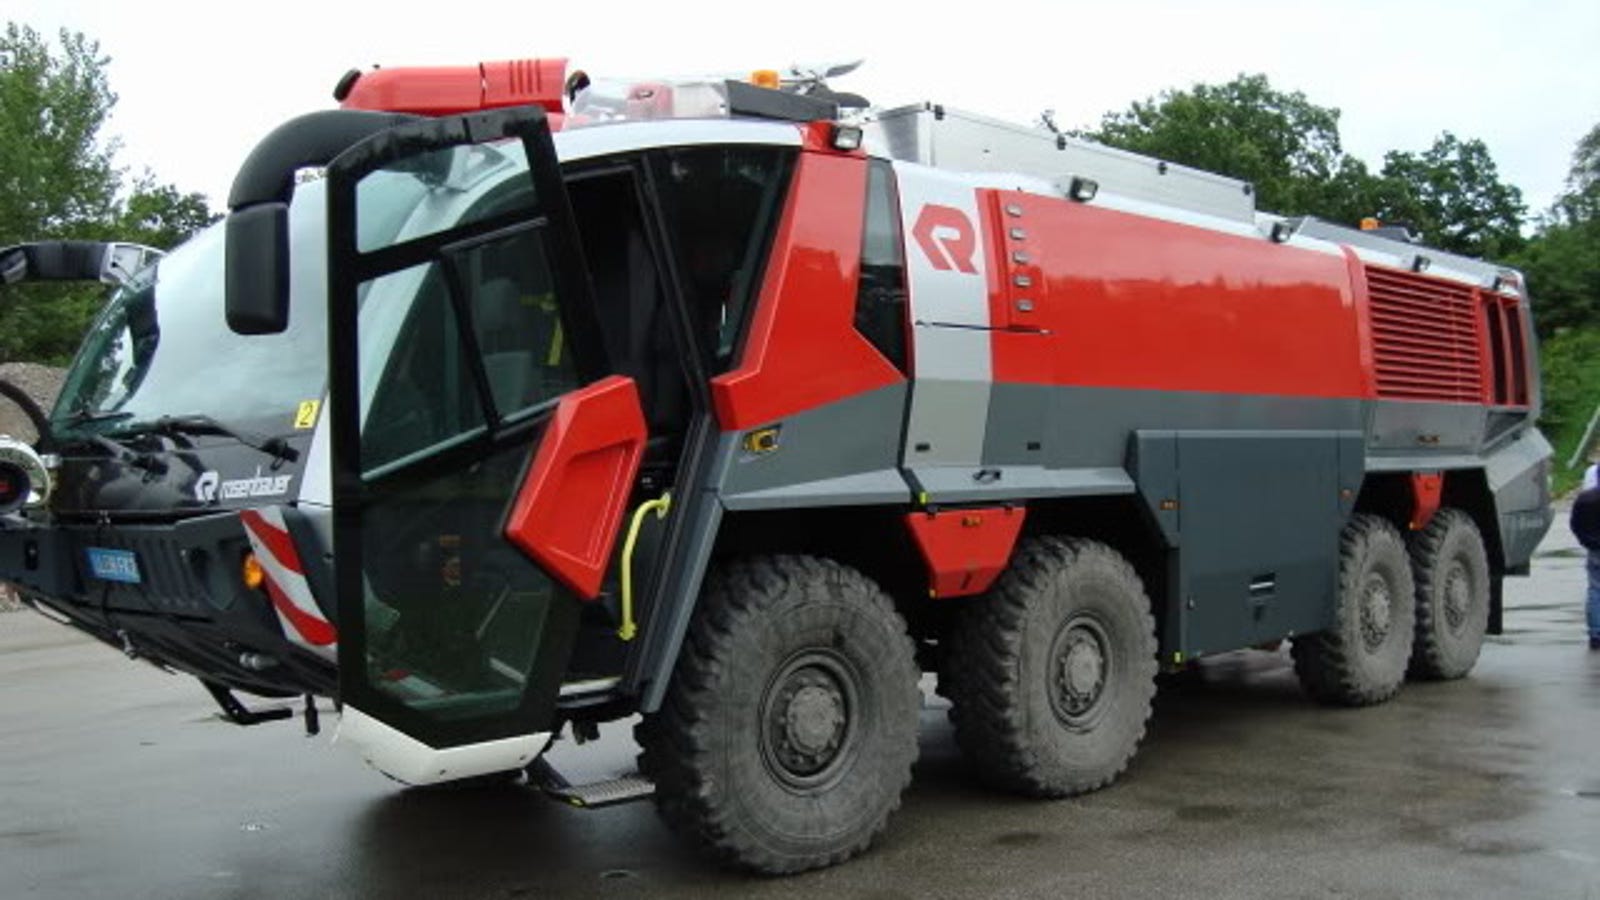 What's the most badass fire-fighting vehicle?